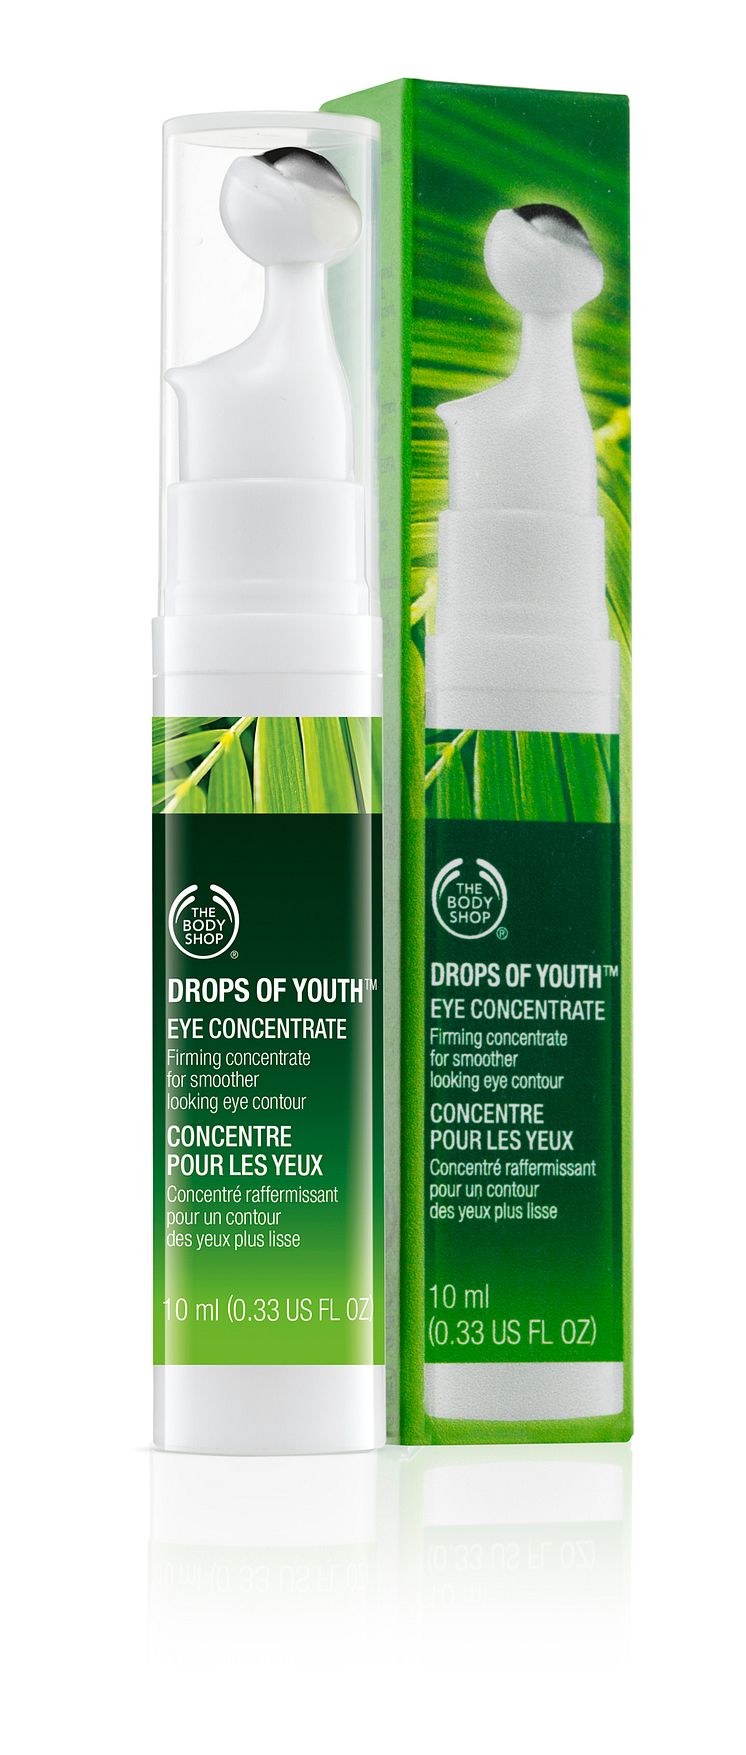 Drops of Youth™ Eye Concentrate (with box)